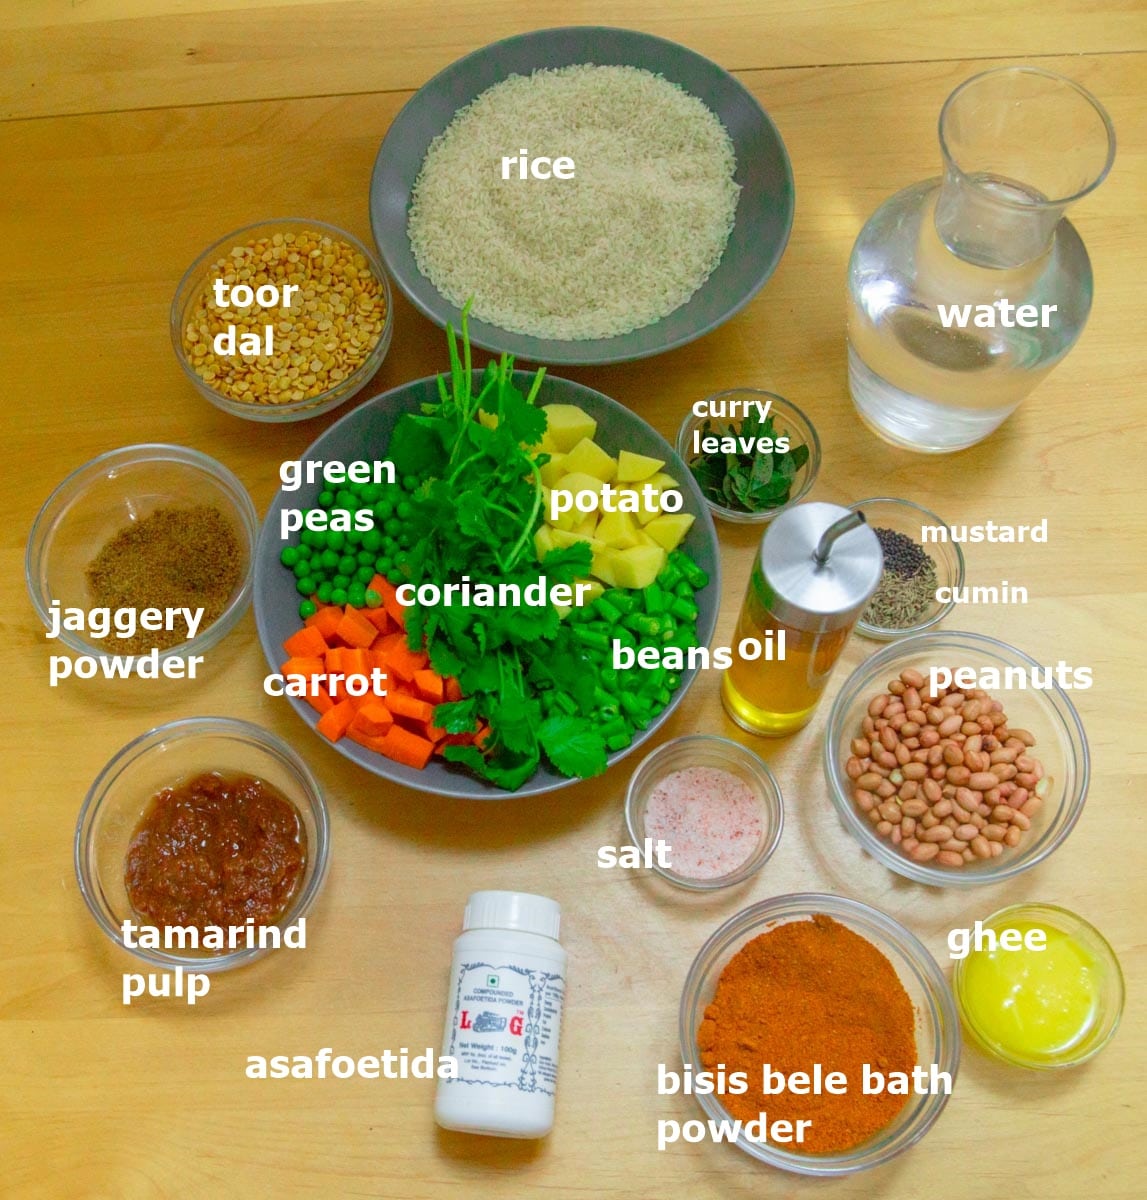 whole and dry spices, vegetables, water, rice and lentils in an individual bowls placed on a wooden table.